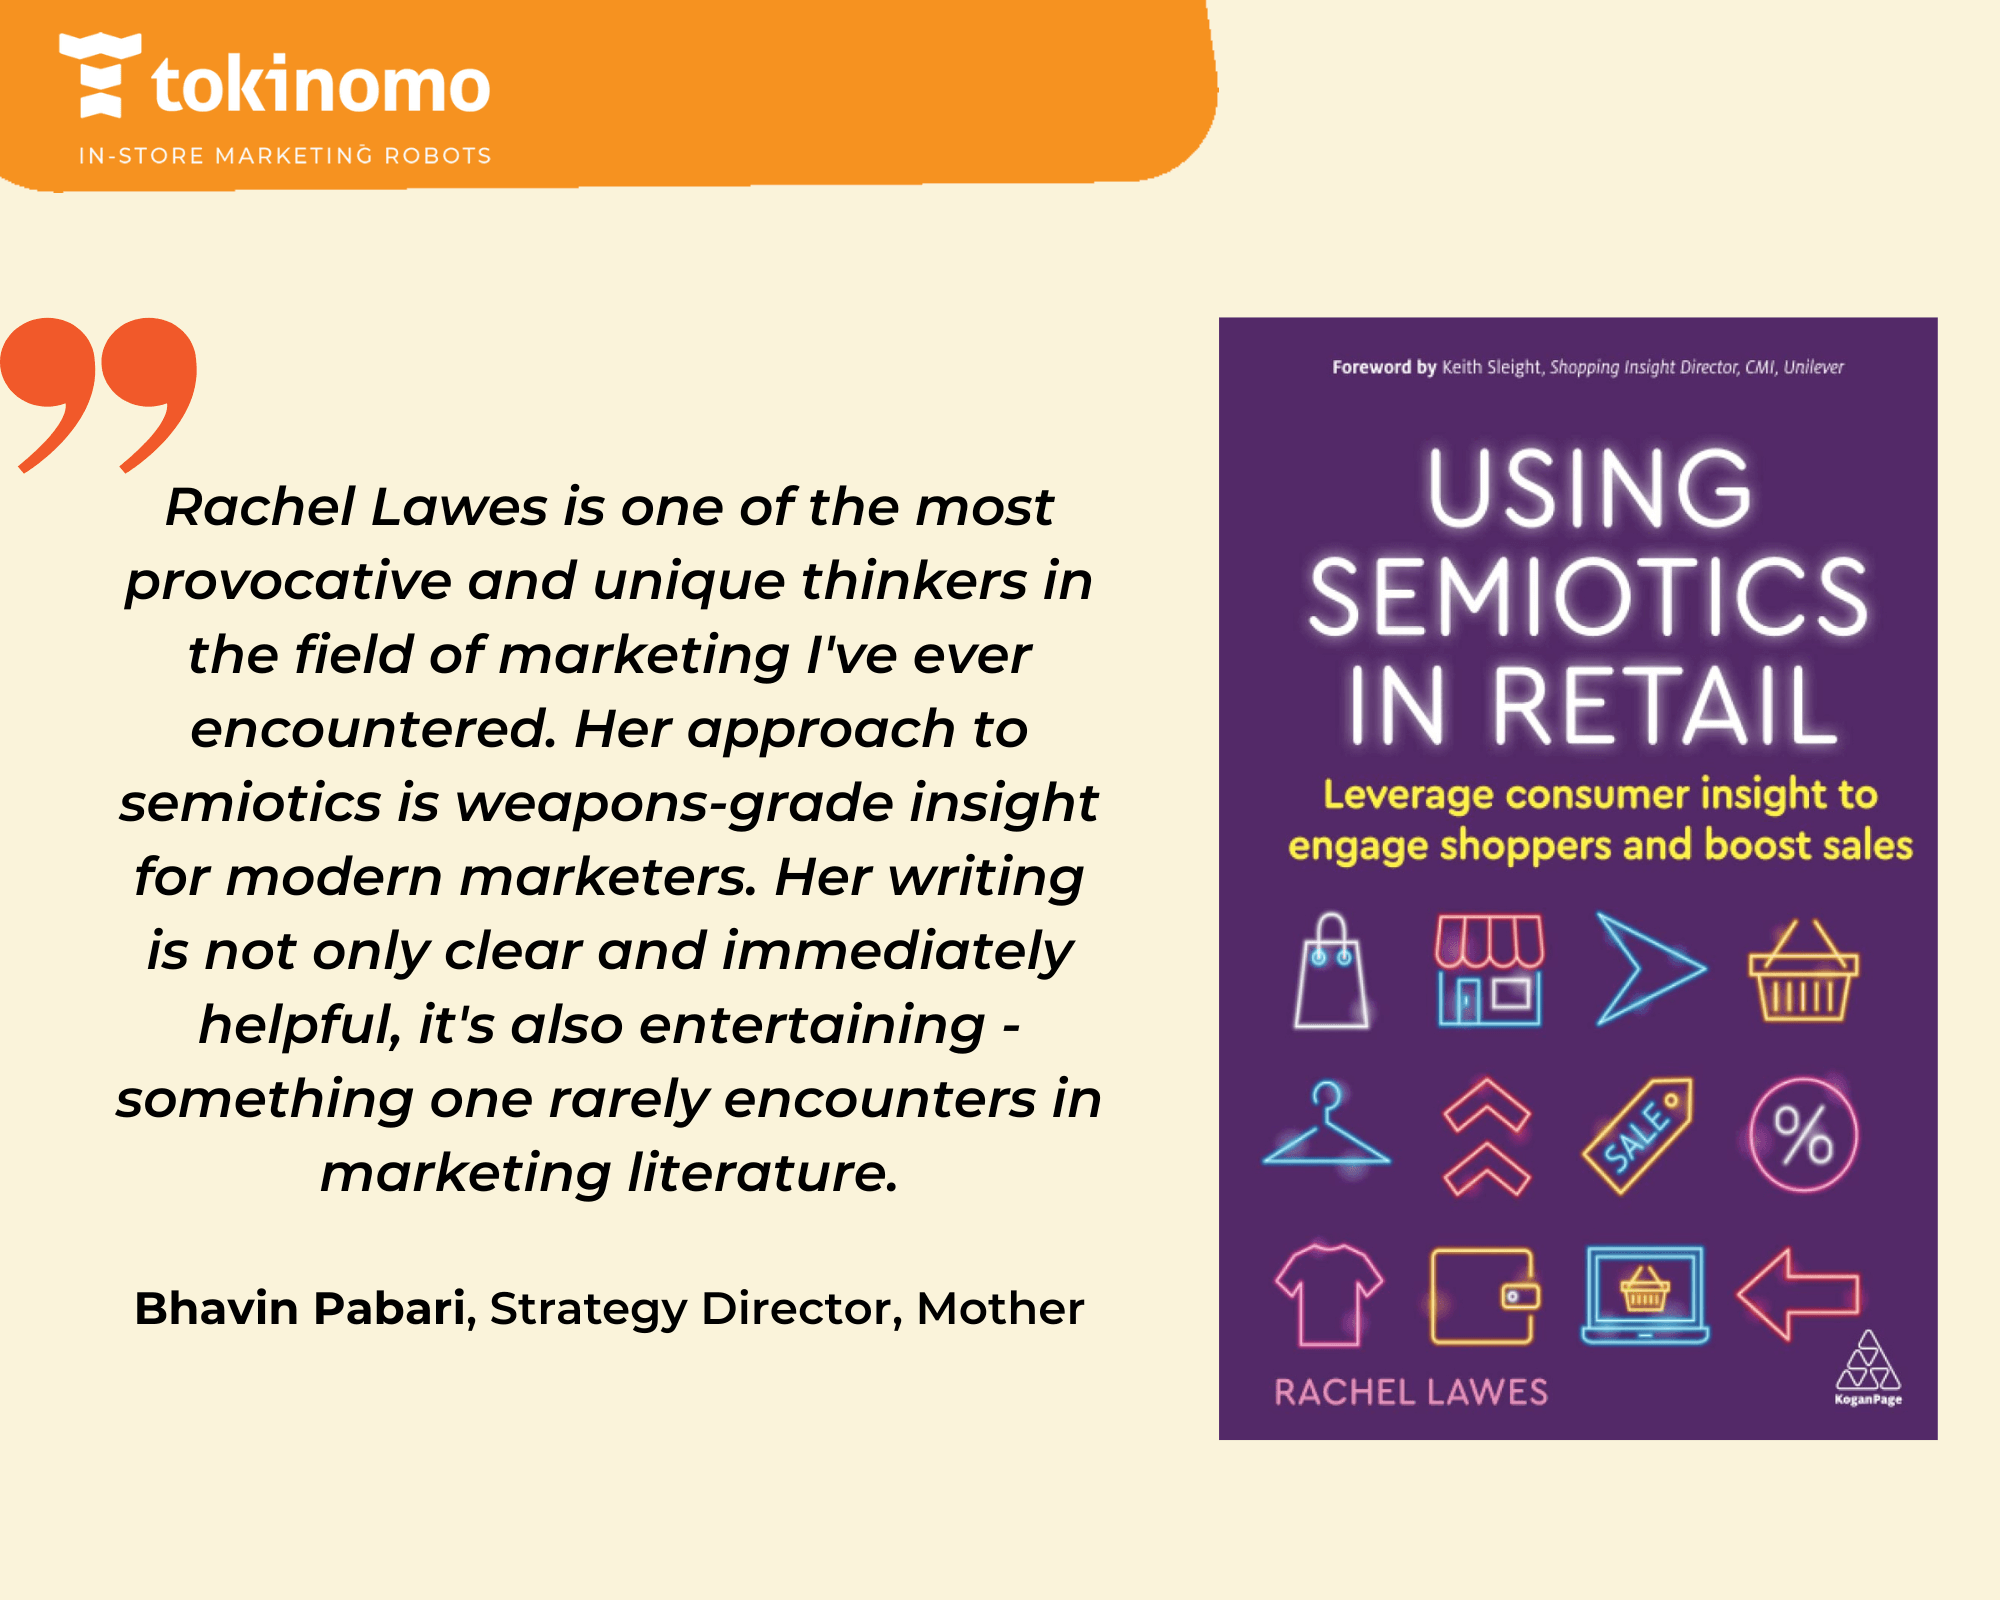 Using semiology in retail